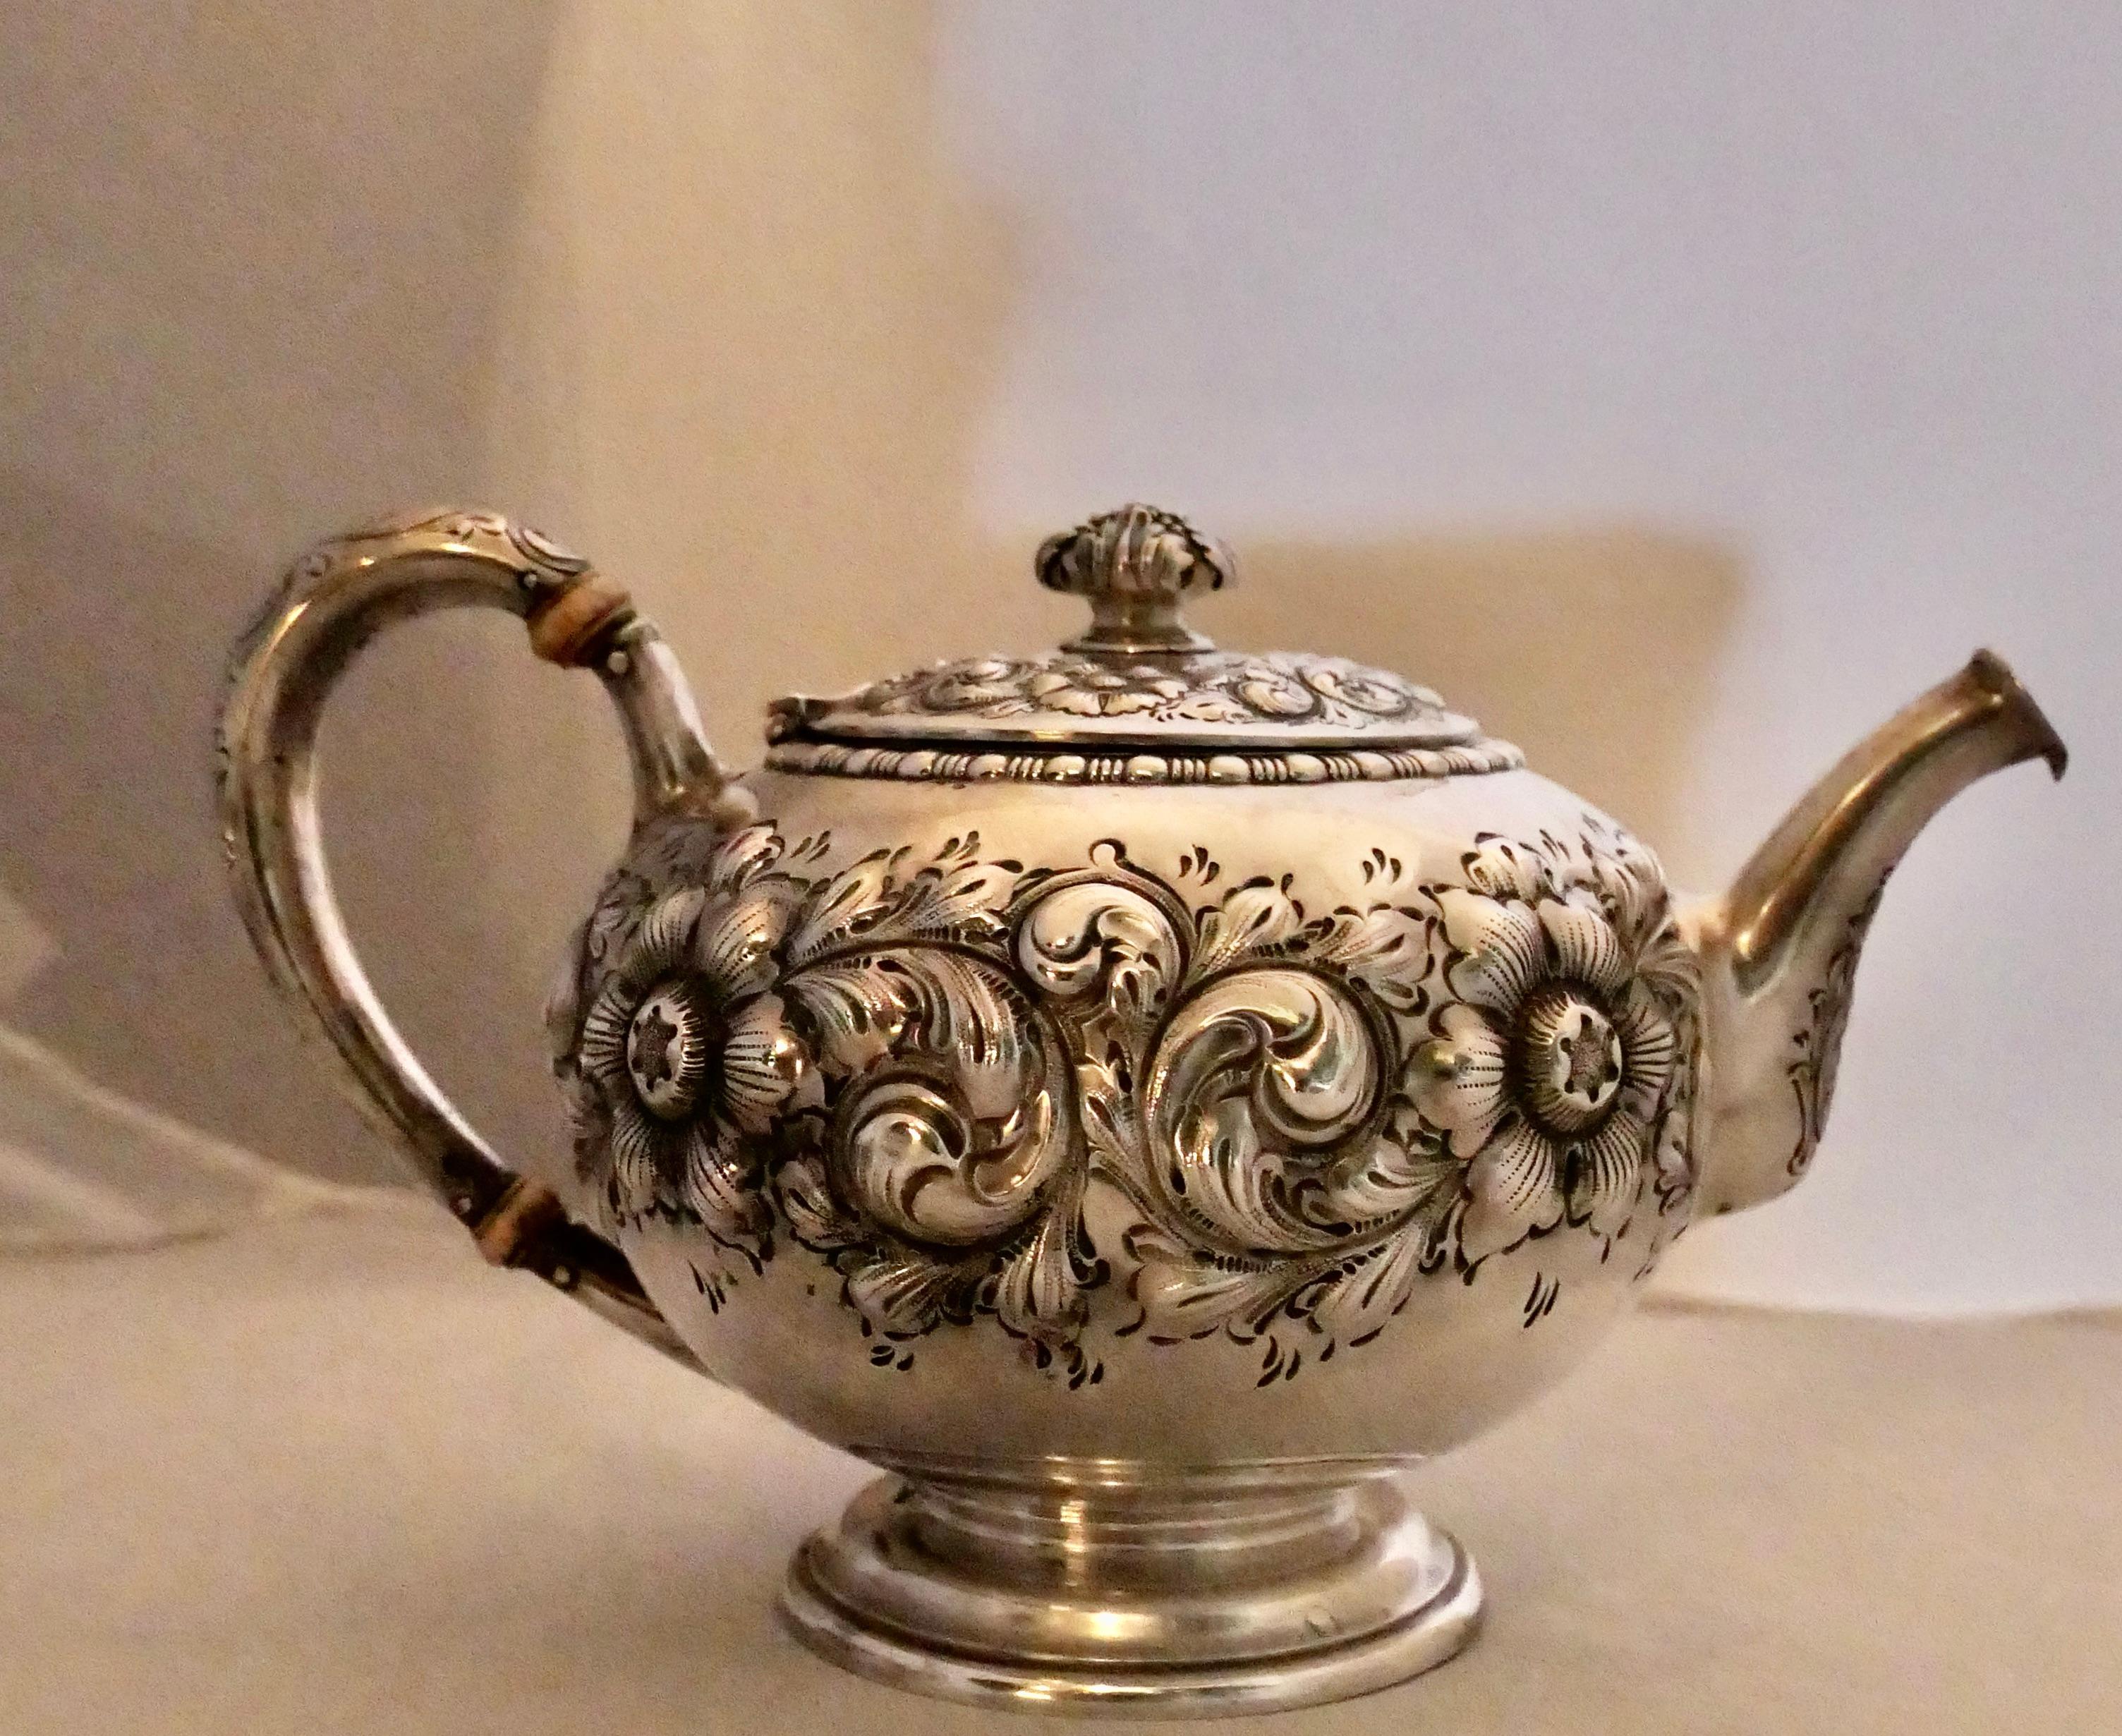 This vintage decorative Victorian sterling silver tea set is beautifully designed & dates from the late 19th century. The three piece tea service features an elaborate repousse’ floral motif that surrounds the bodies of each item in the set. It is a